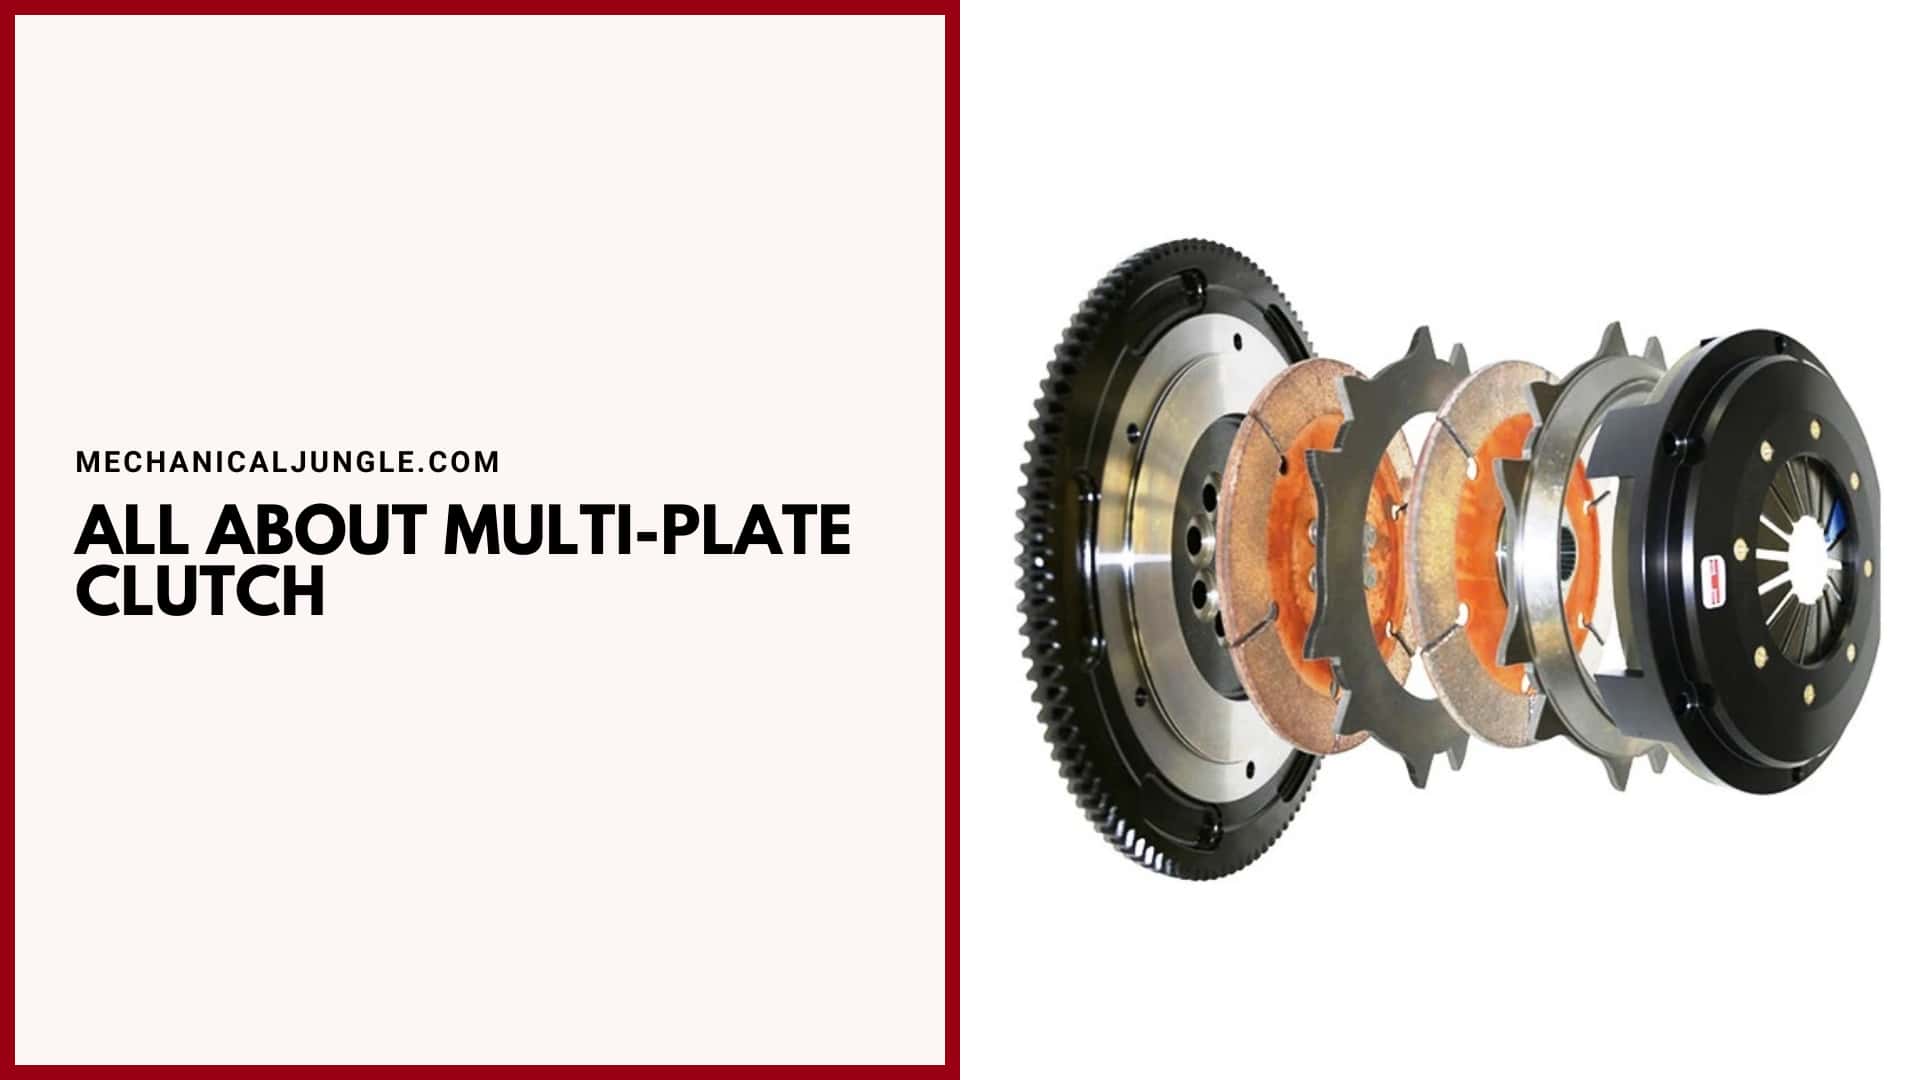 All About Multi-Plate Clutch